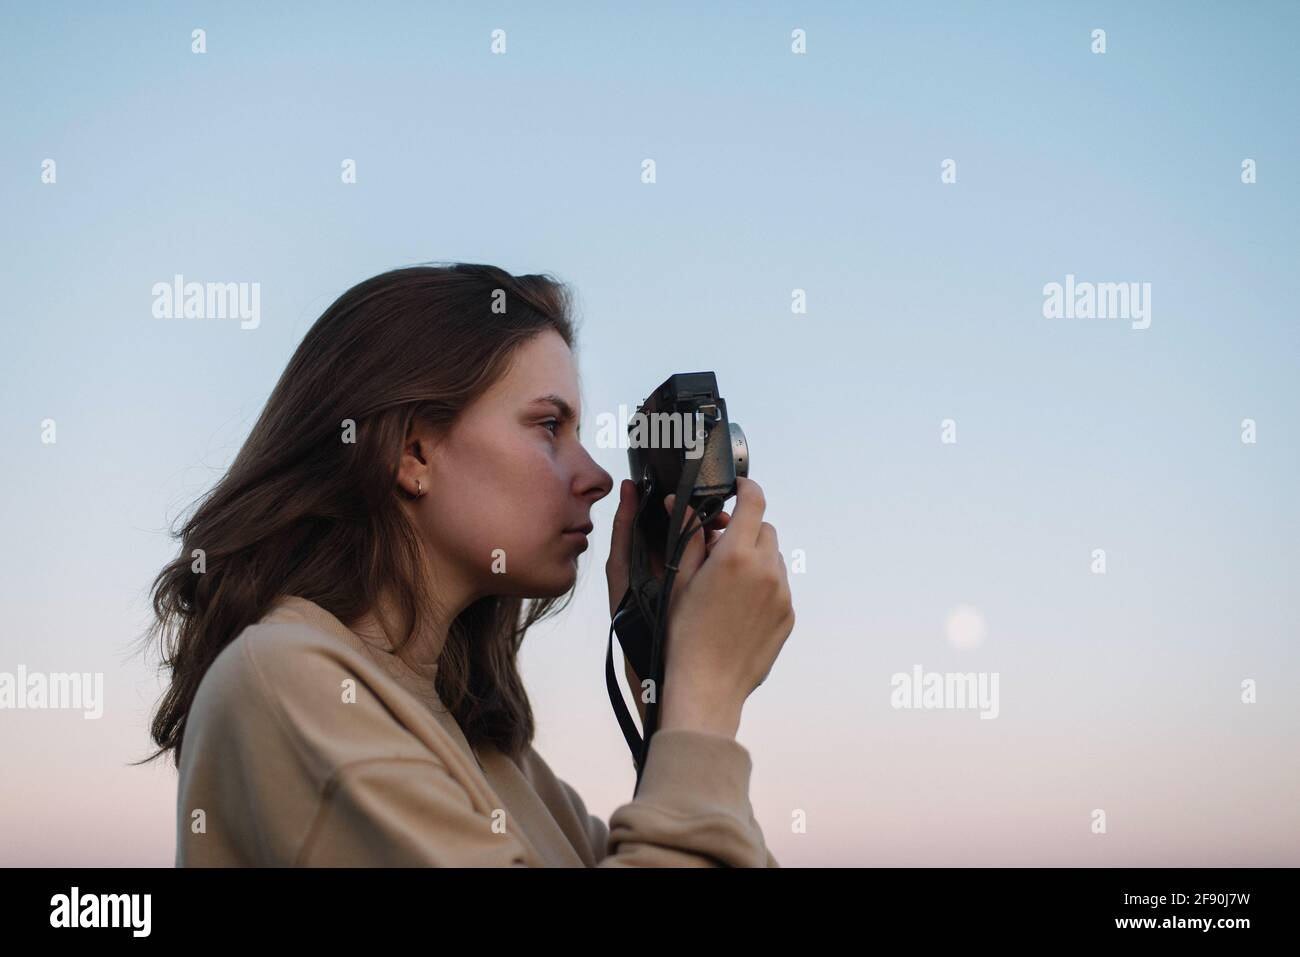 Woman taking pictures outdoor with a film camera during a sunset Stock Photo